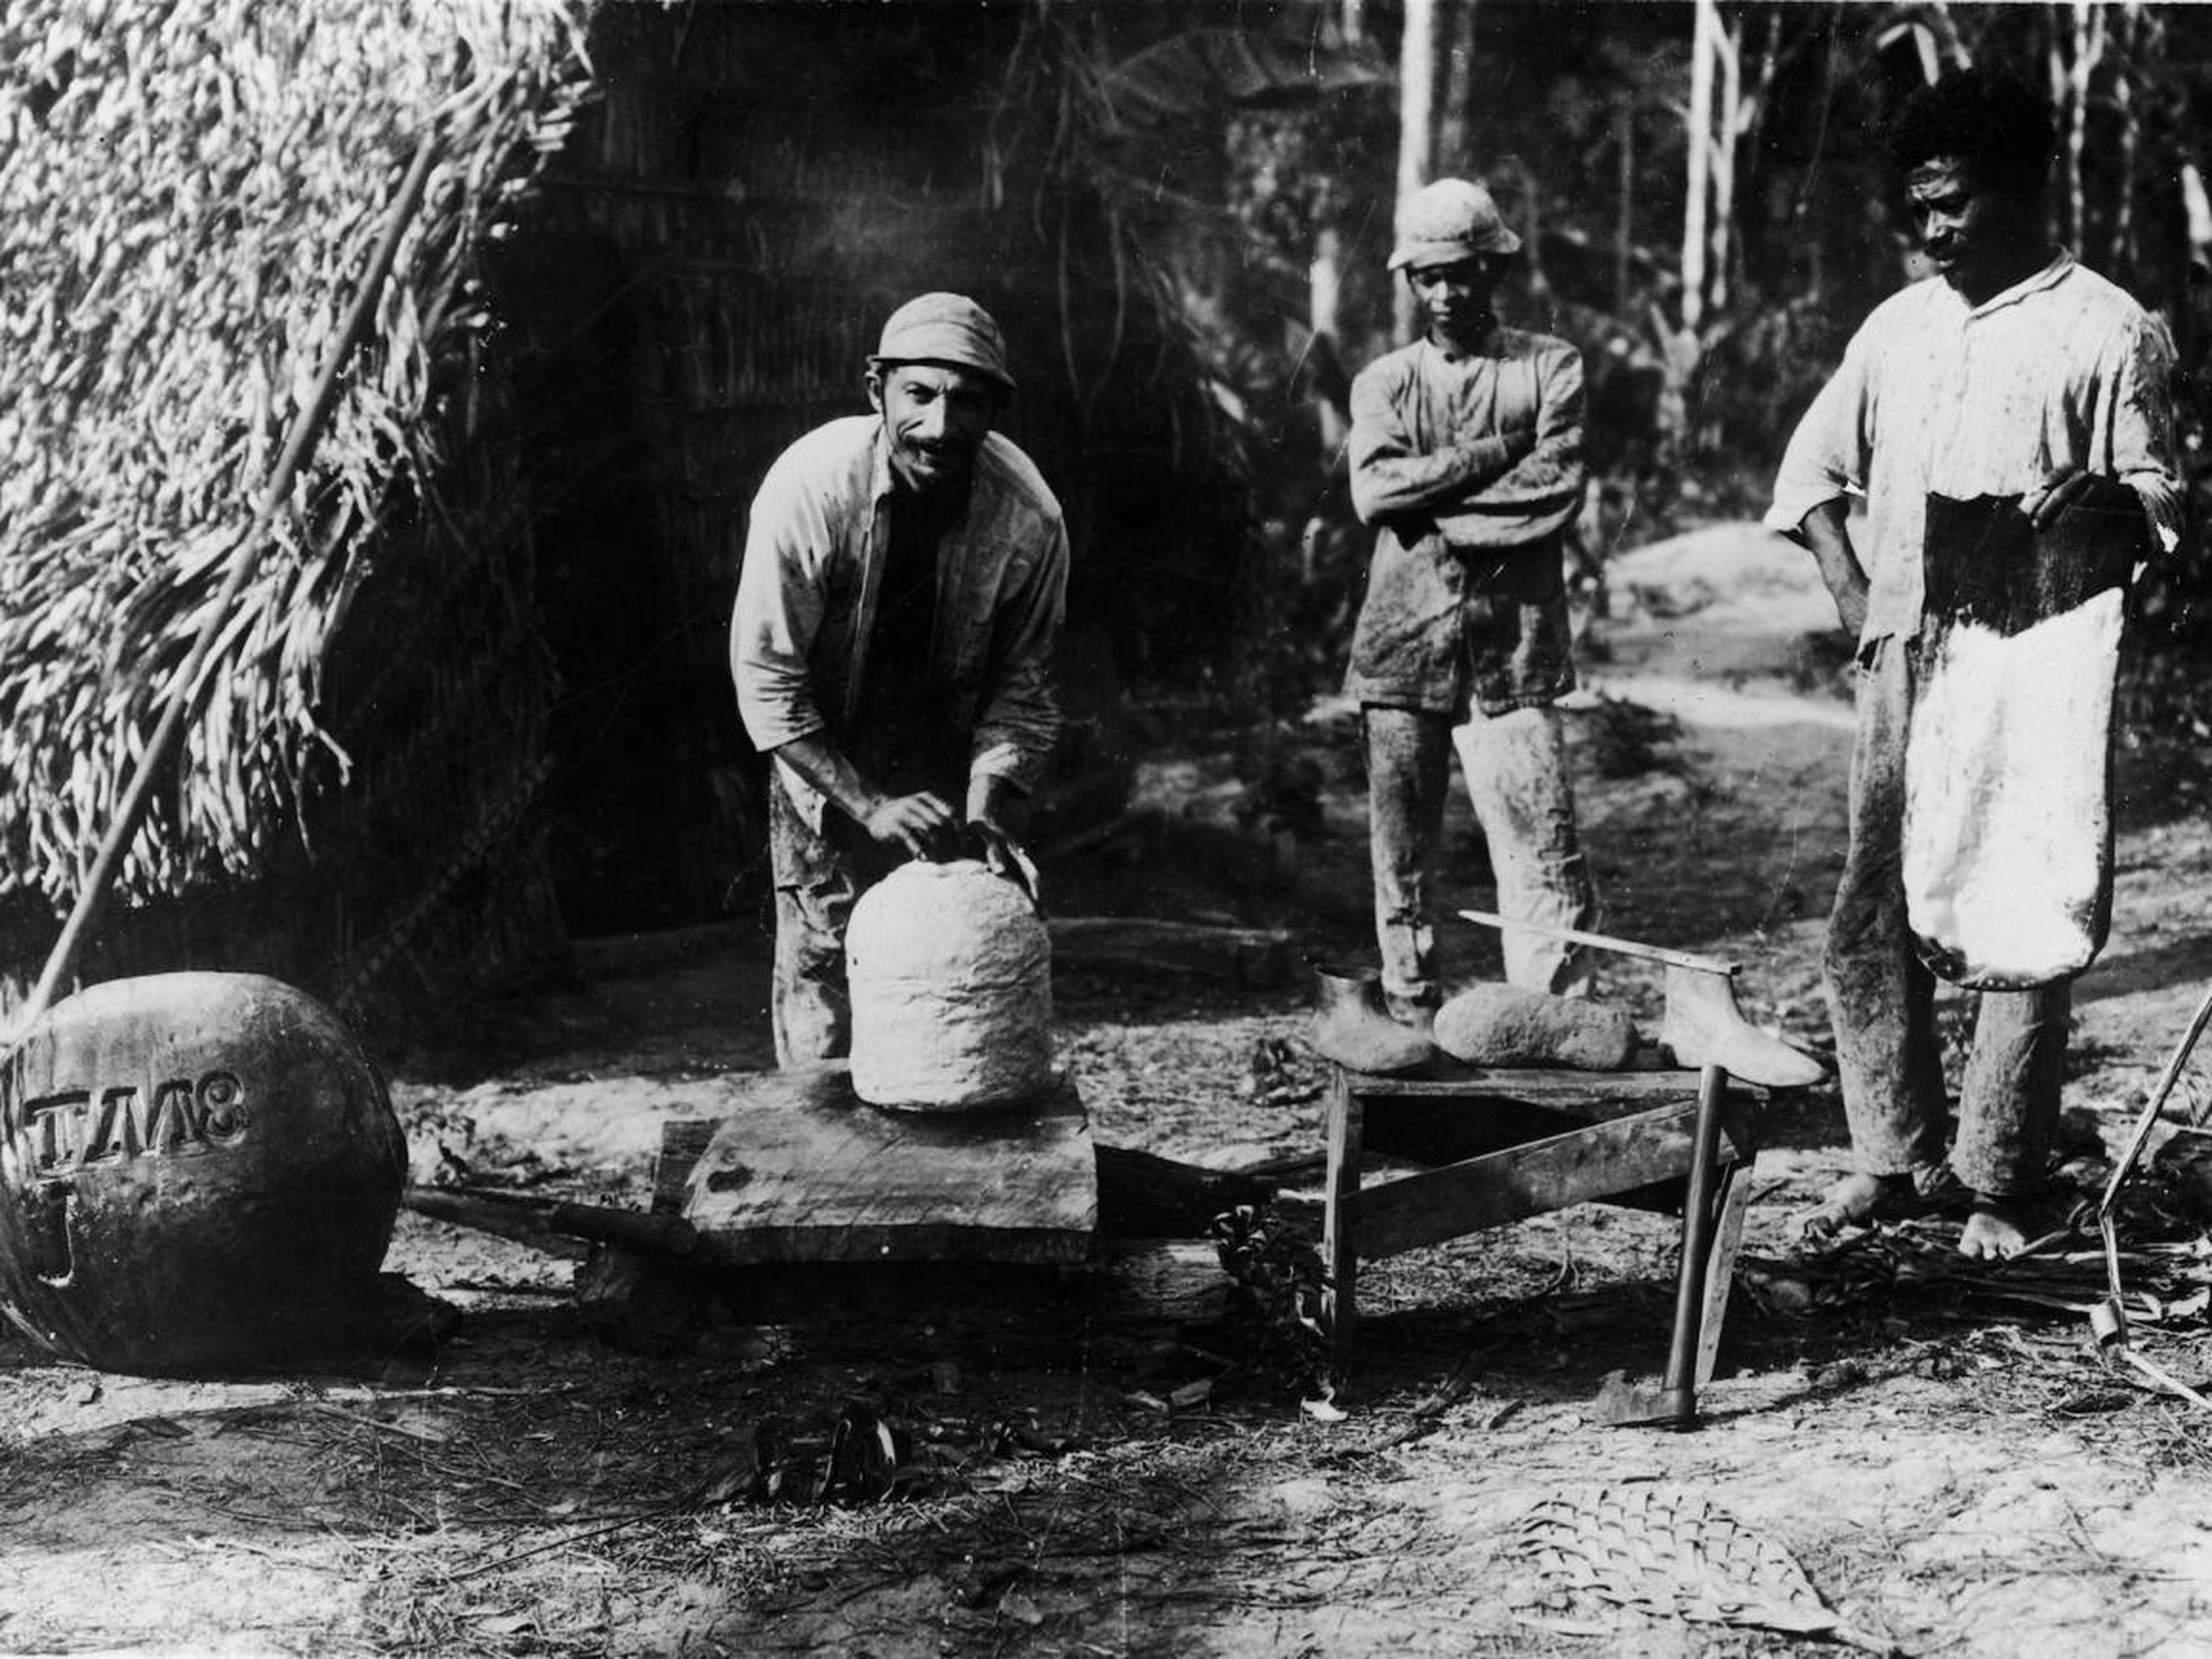 Brazilian men involved in the rubber trade around 1900, before Ford moved his operation into the Amazon.